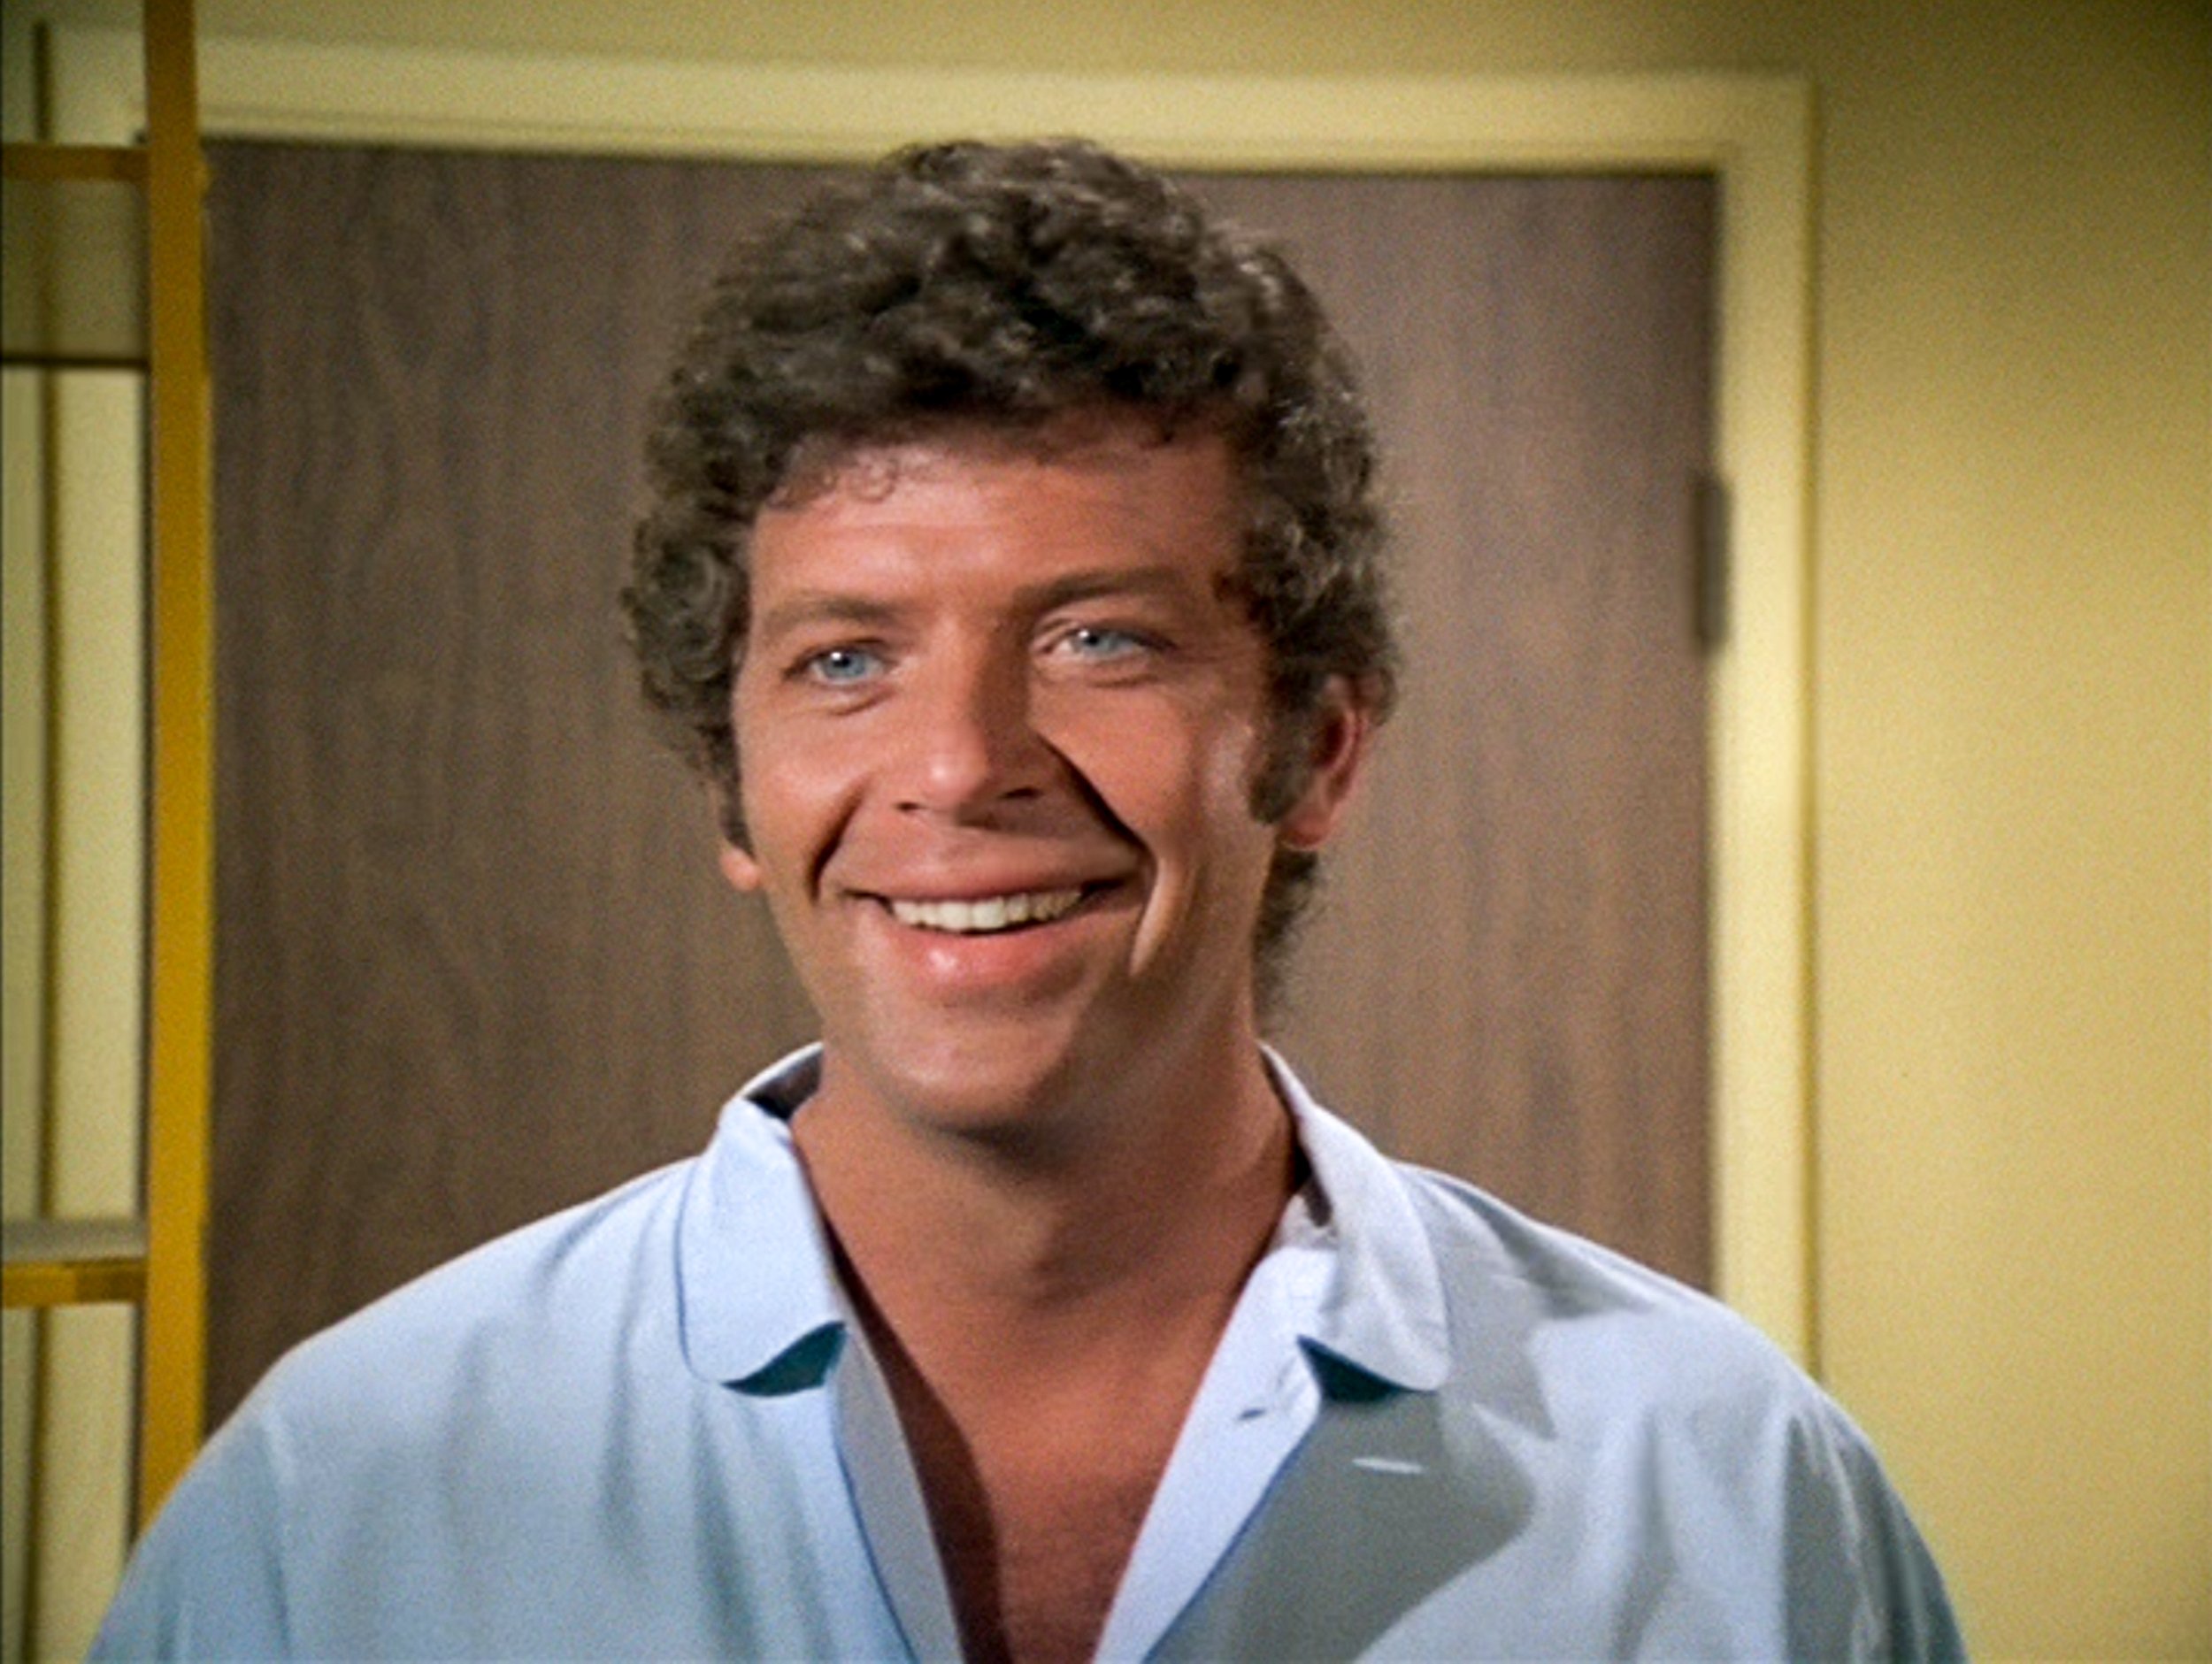 Robert Reed as Mike Brady in THE BRADY BUNCH episode, "Pass The Tabu" which aired on September 29, 1972 | Photo: Getty Images